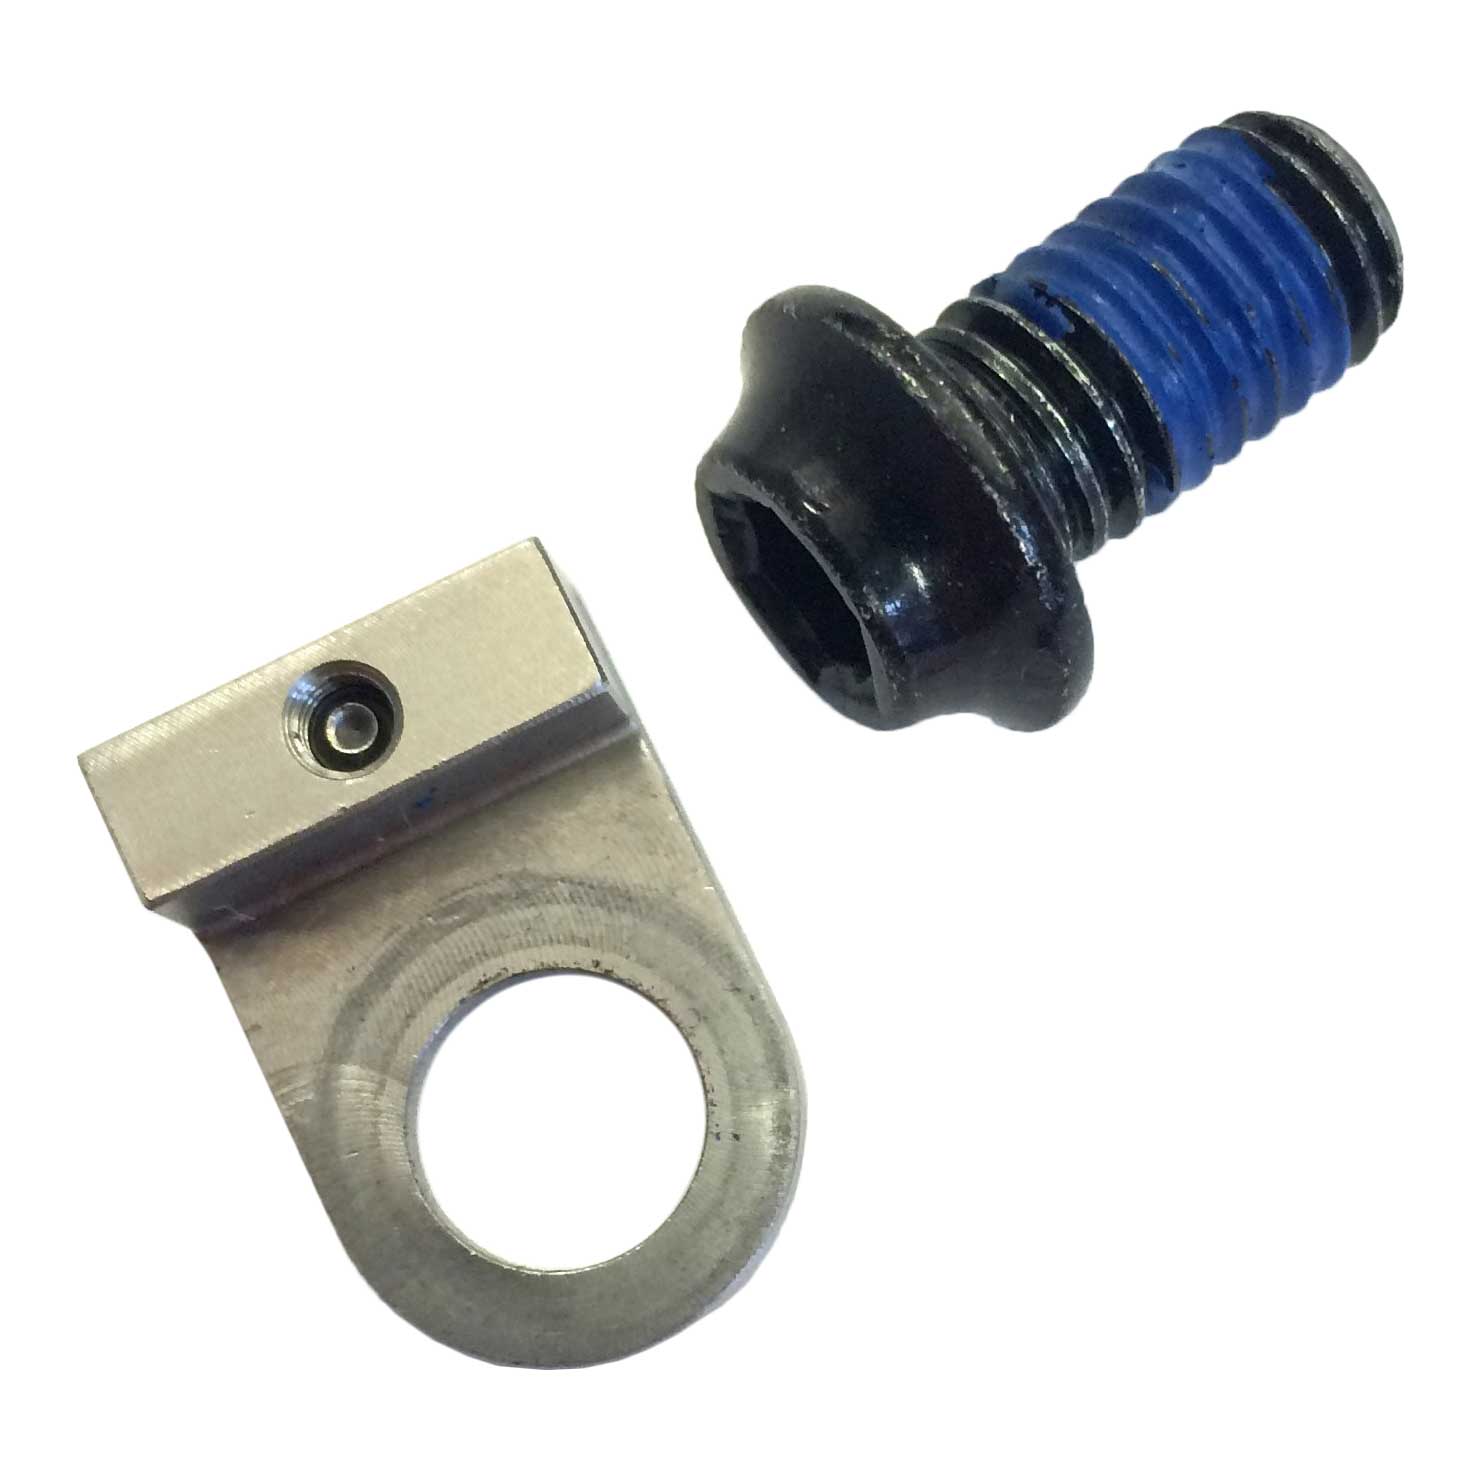 Image of Specialized S160500002 Rear Shock Bolt Kit for Stumpjumper MY16